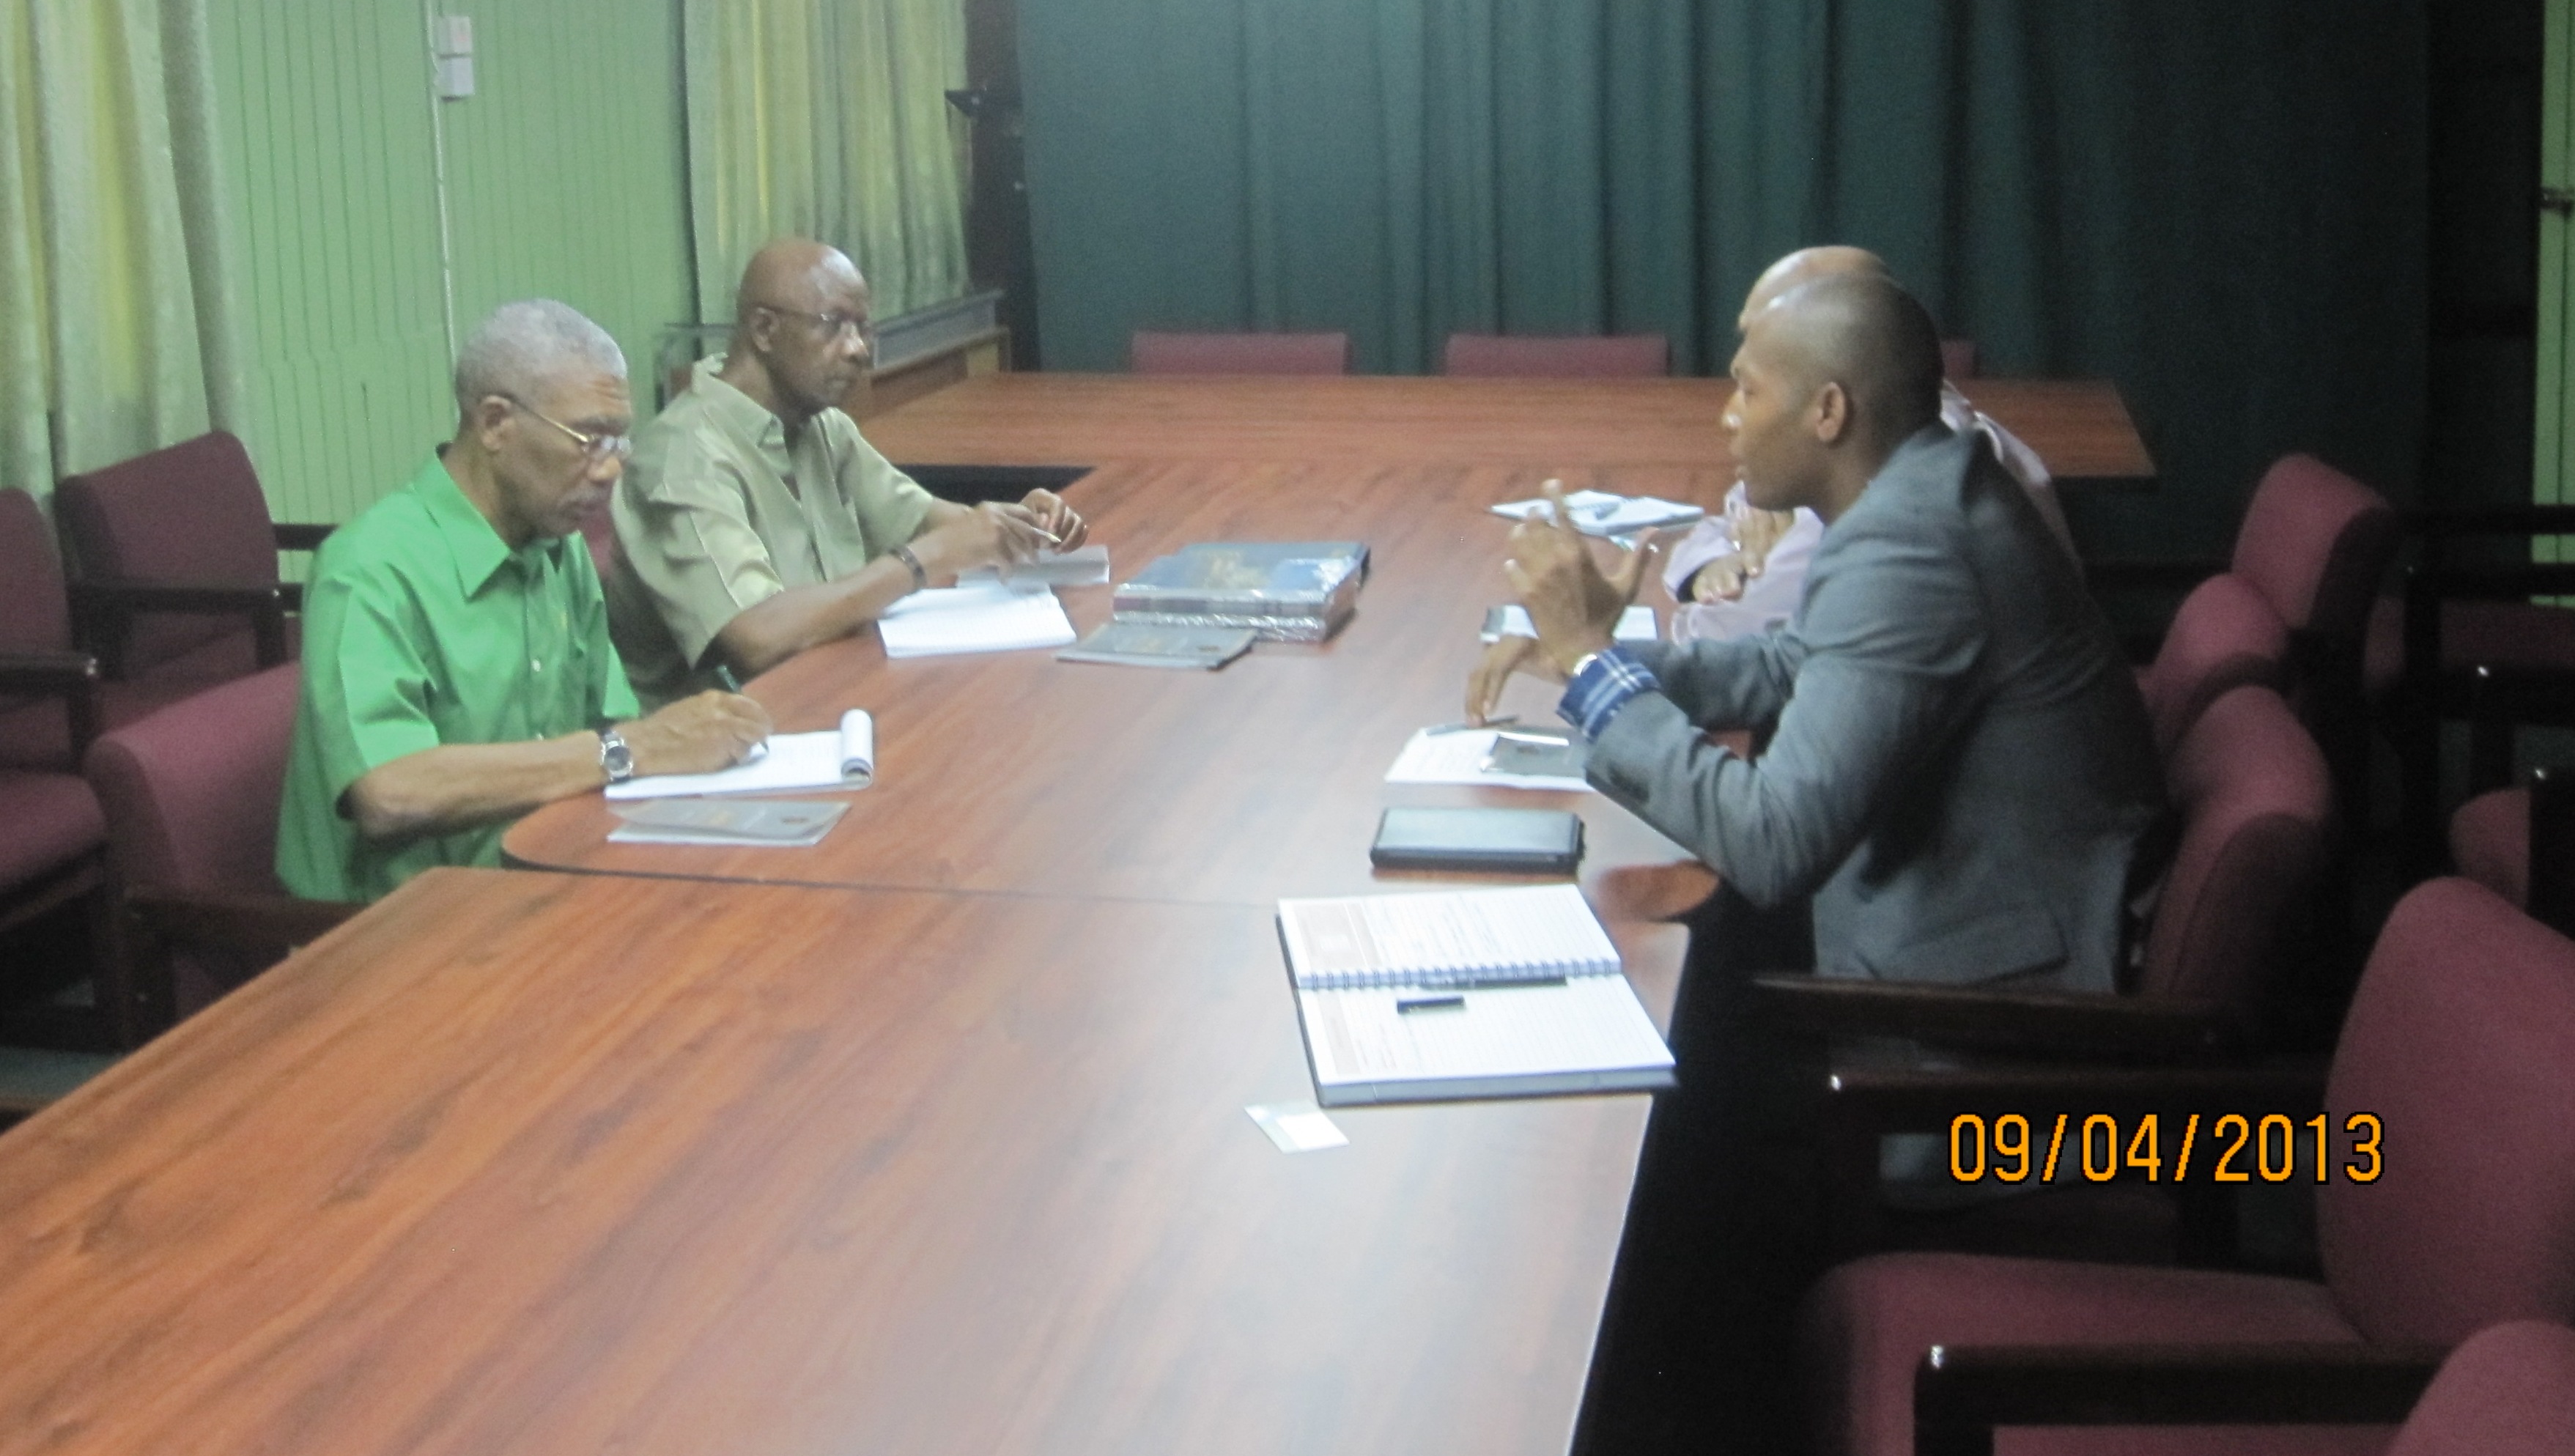 GCCI President, Mr. Clinton Urling and other representatives meet with the Leader of the Opposition.